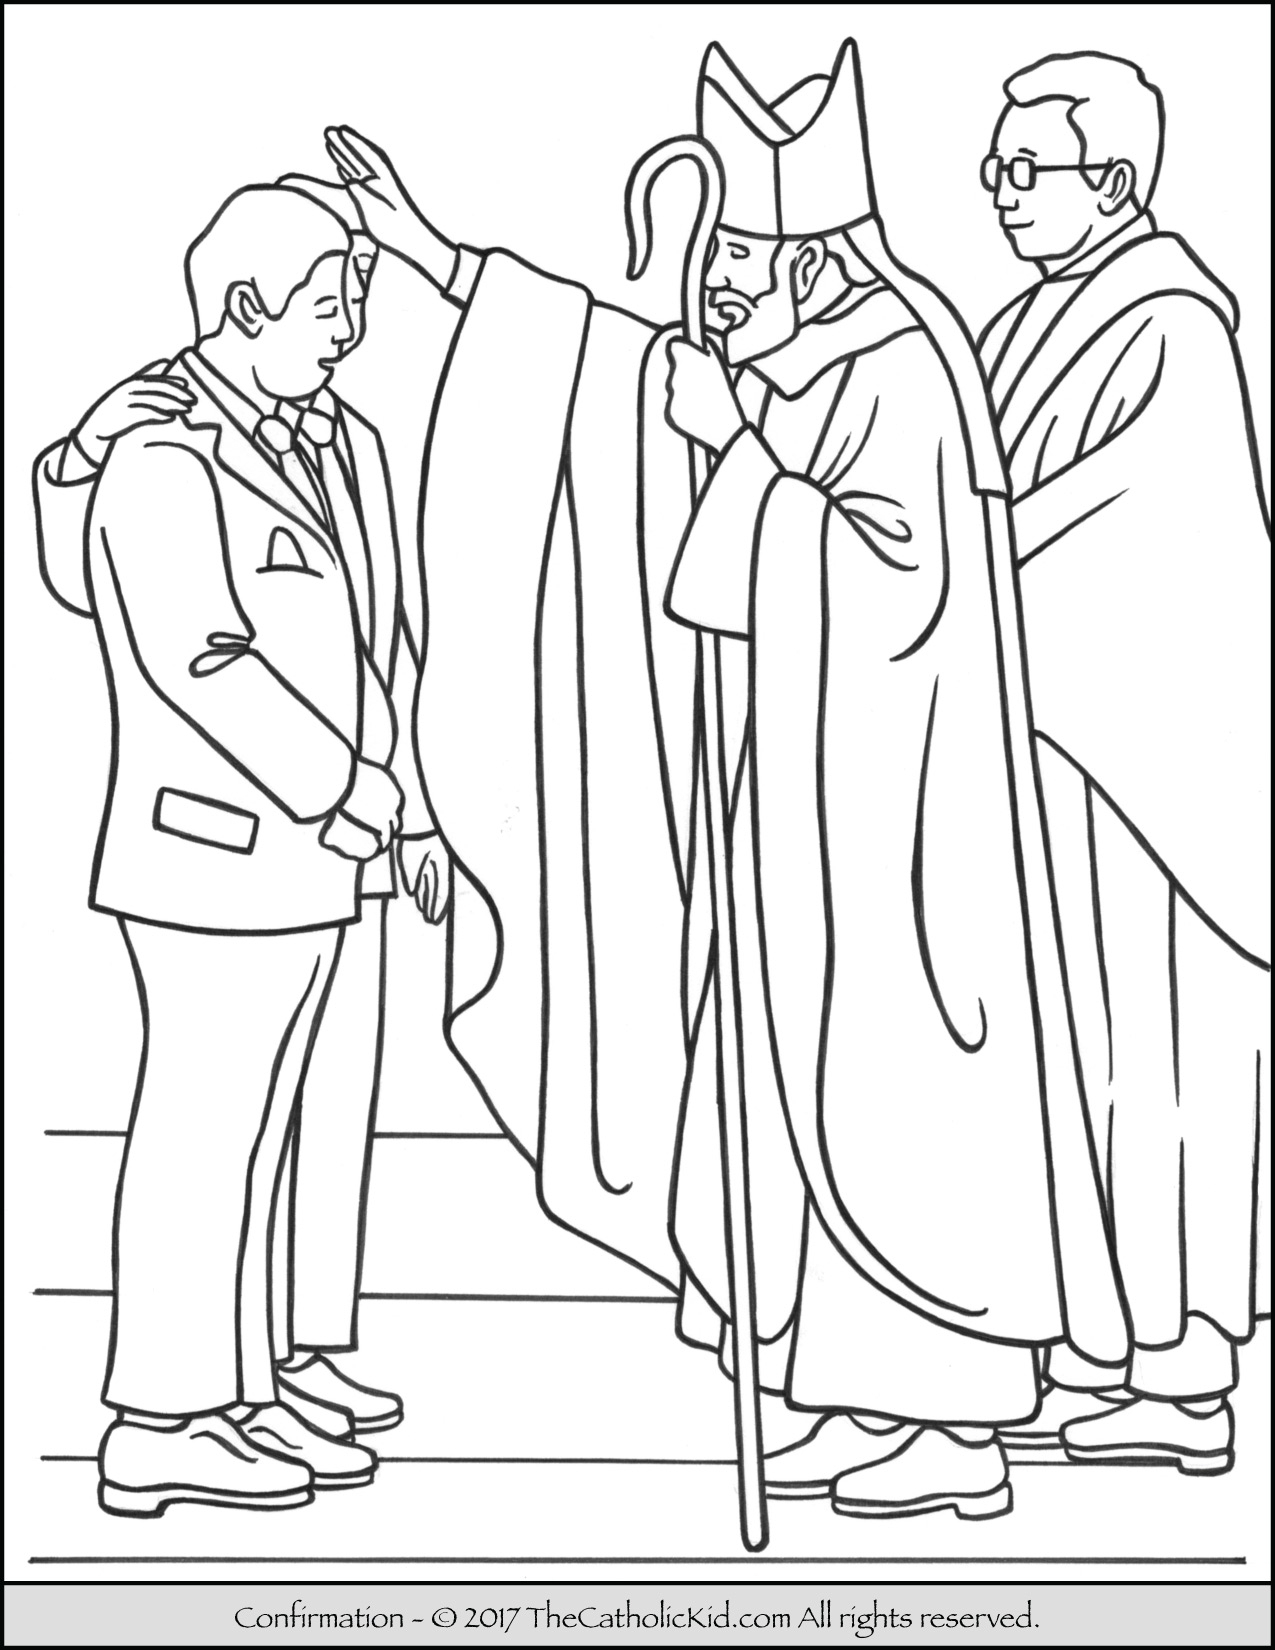 Lds Holy Ghost Coloring Page Holy Ghost Coloring Page Lds Spirit Dove Gifts Of The Catholic Free